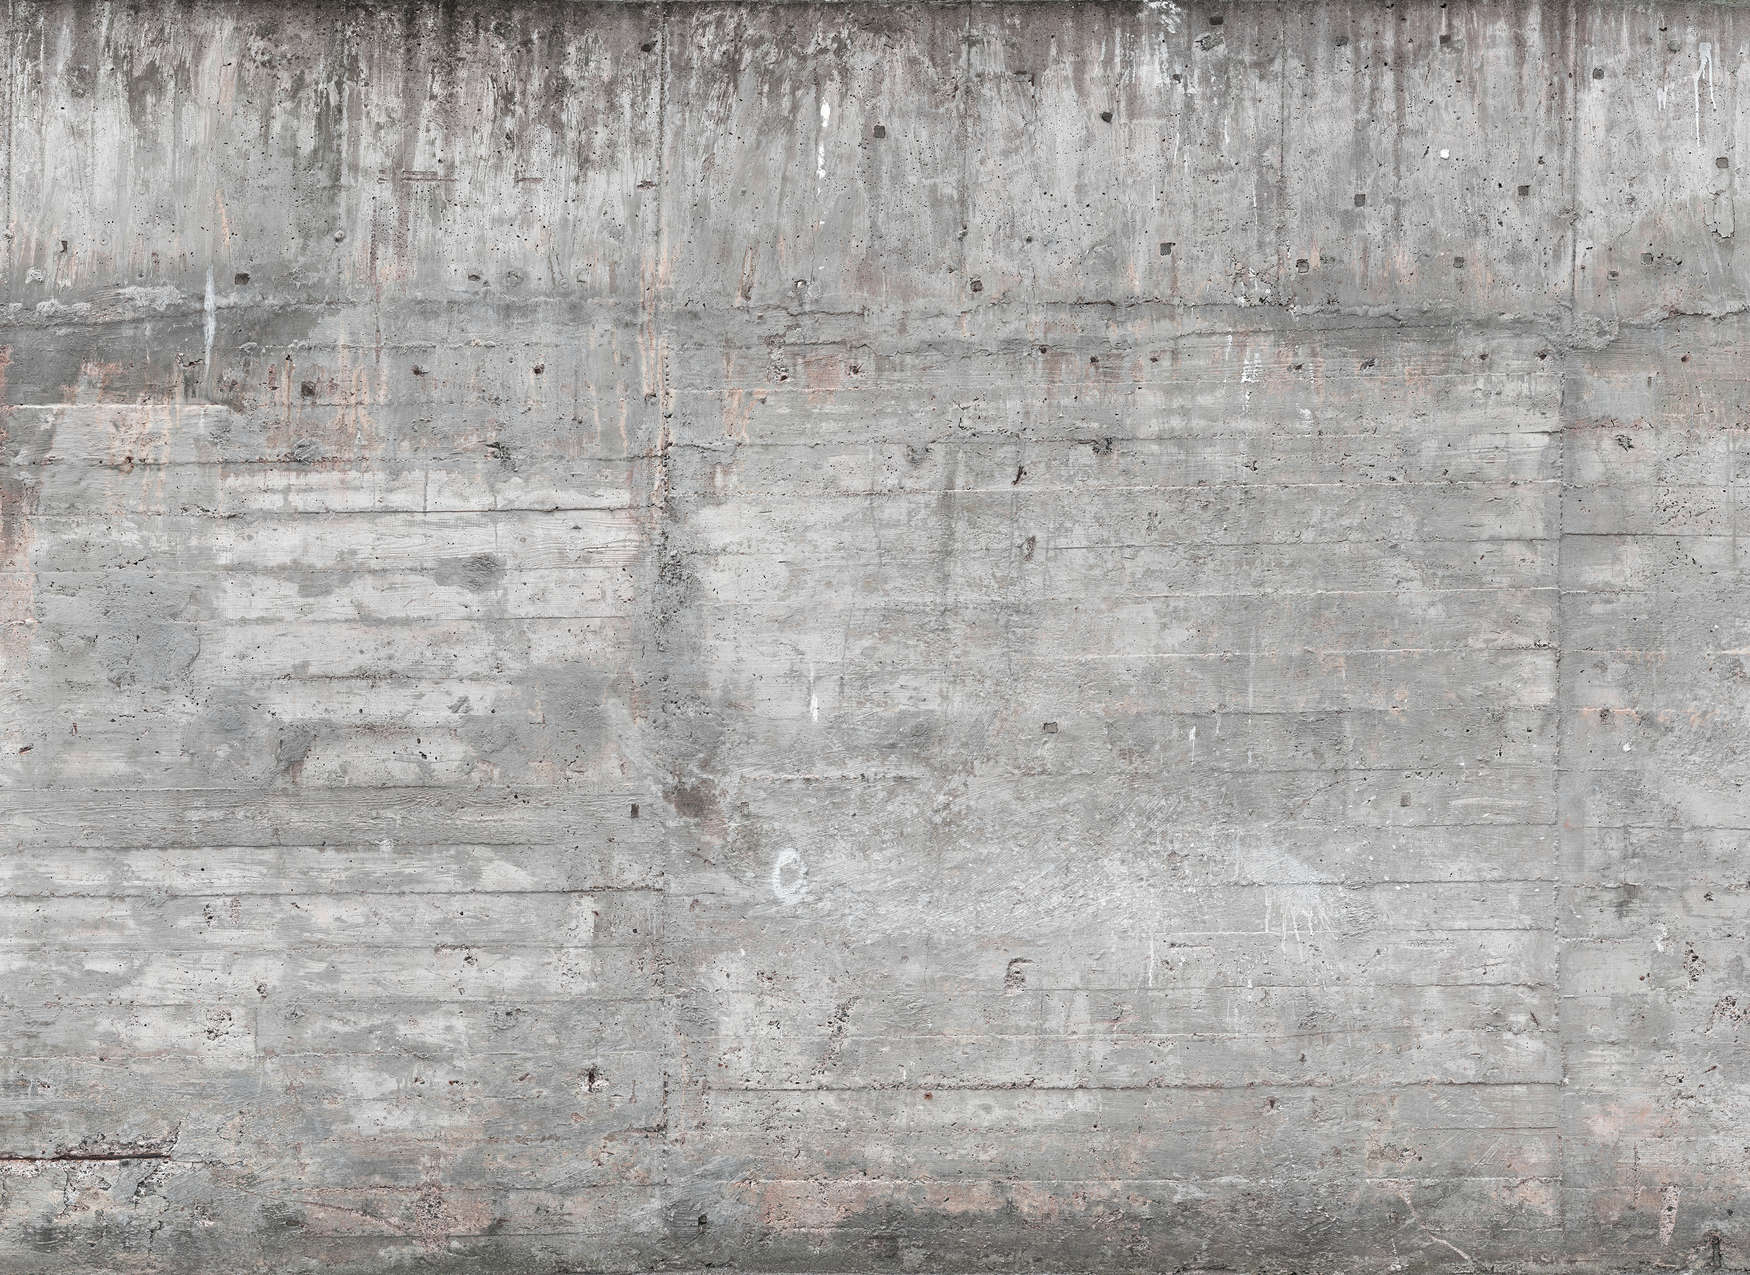             Concrete wall in industrial style - grey, brown
        